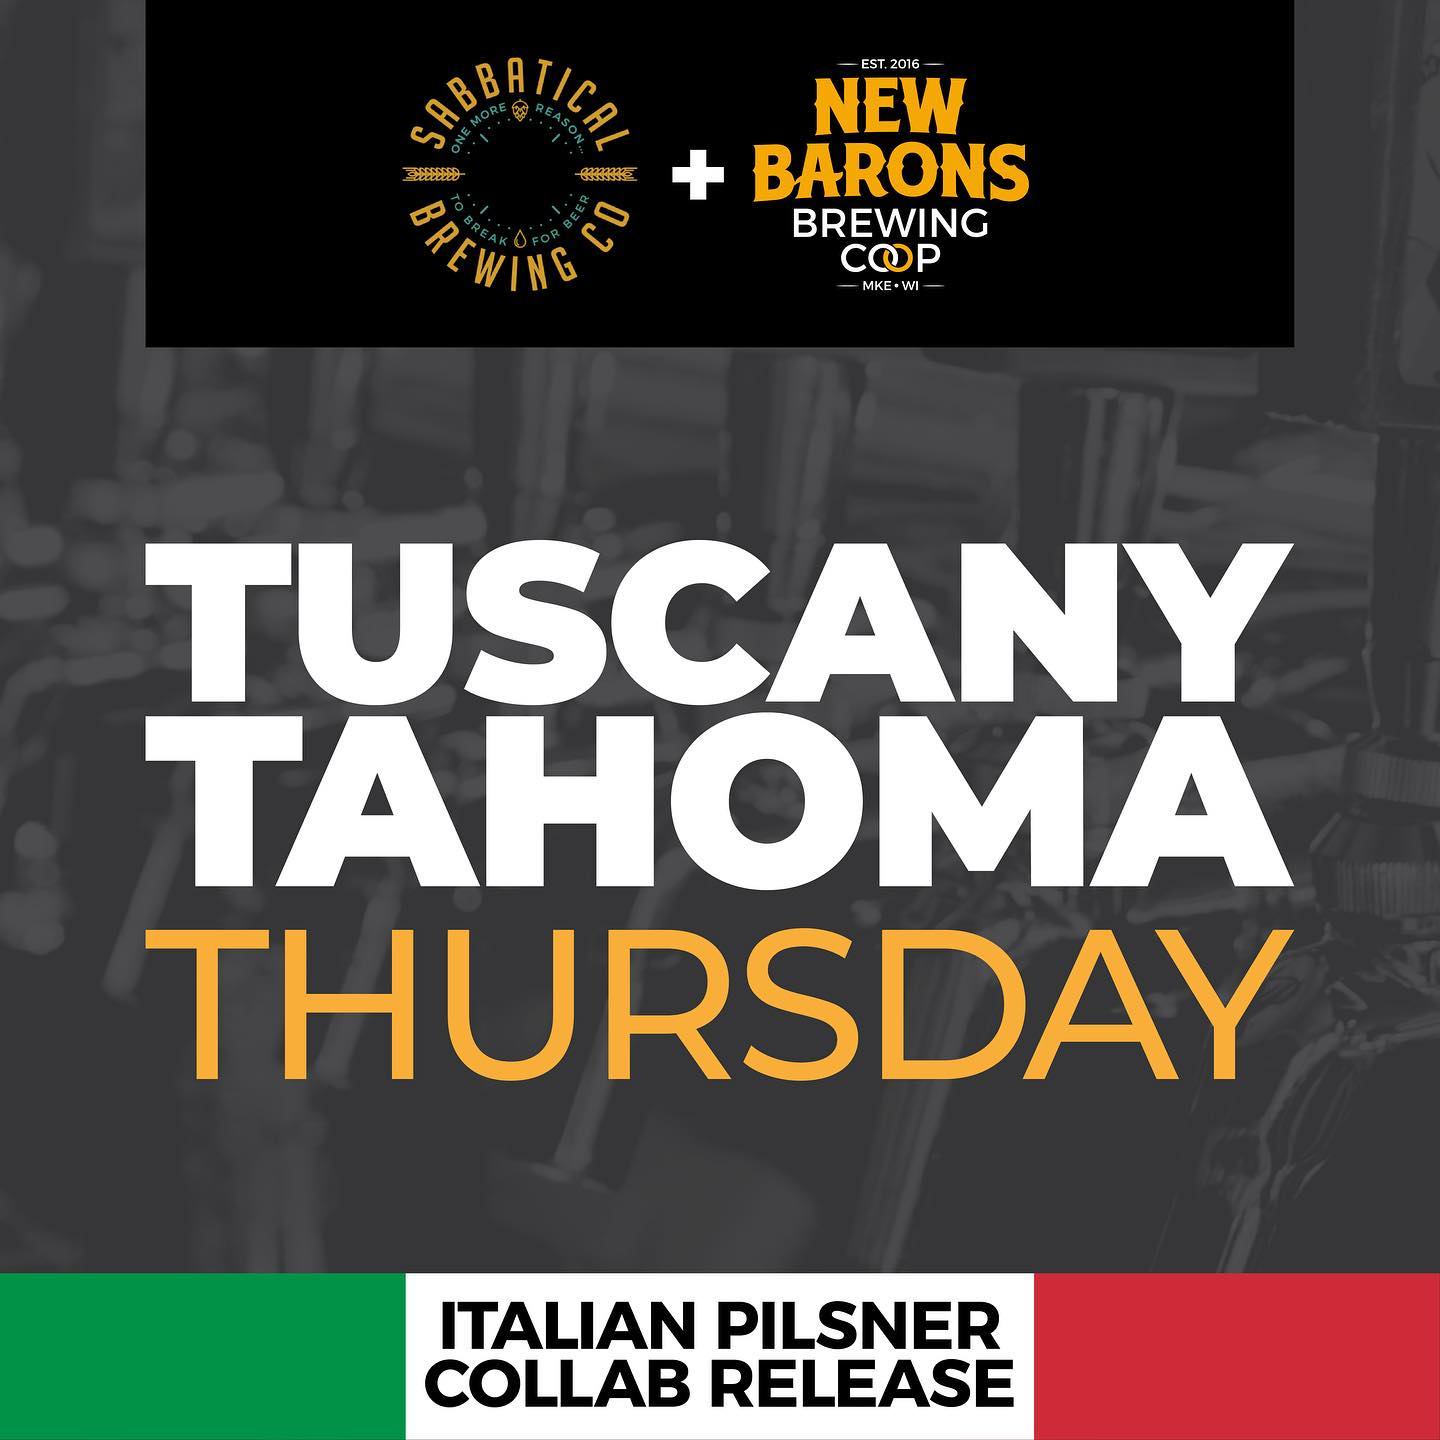 🇮🇹Our Italian Pilsner collaboration with @sabbaticalbeer is being released tomorrow and we want you to KICK THE KEG!💪🏼 Join us tomorrow for this super limited beer release. Tuscany Tahoma highlights Wisconsin grown Tahoma hops and has an herbal, grassy, slightly peppery Flavor profile. The person who kicks the keg will win a $50 gift card to @groppismarket so that they can create their own perfect Tuscan night at home!🍝🤌🏼 Come enjoy a pint and learn more about the process of making an Italian Pils🍻